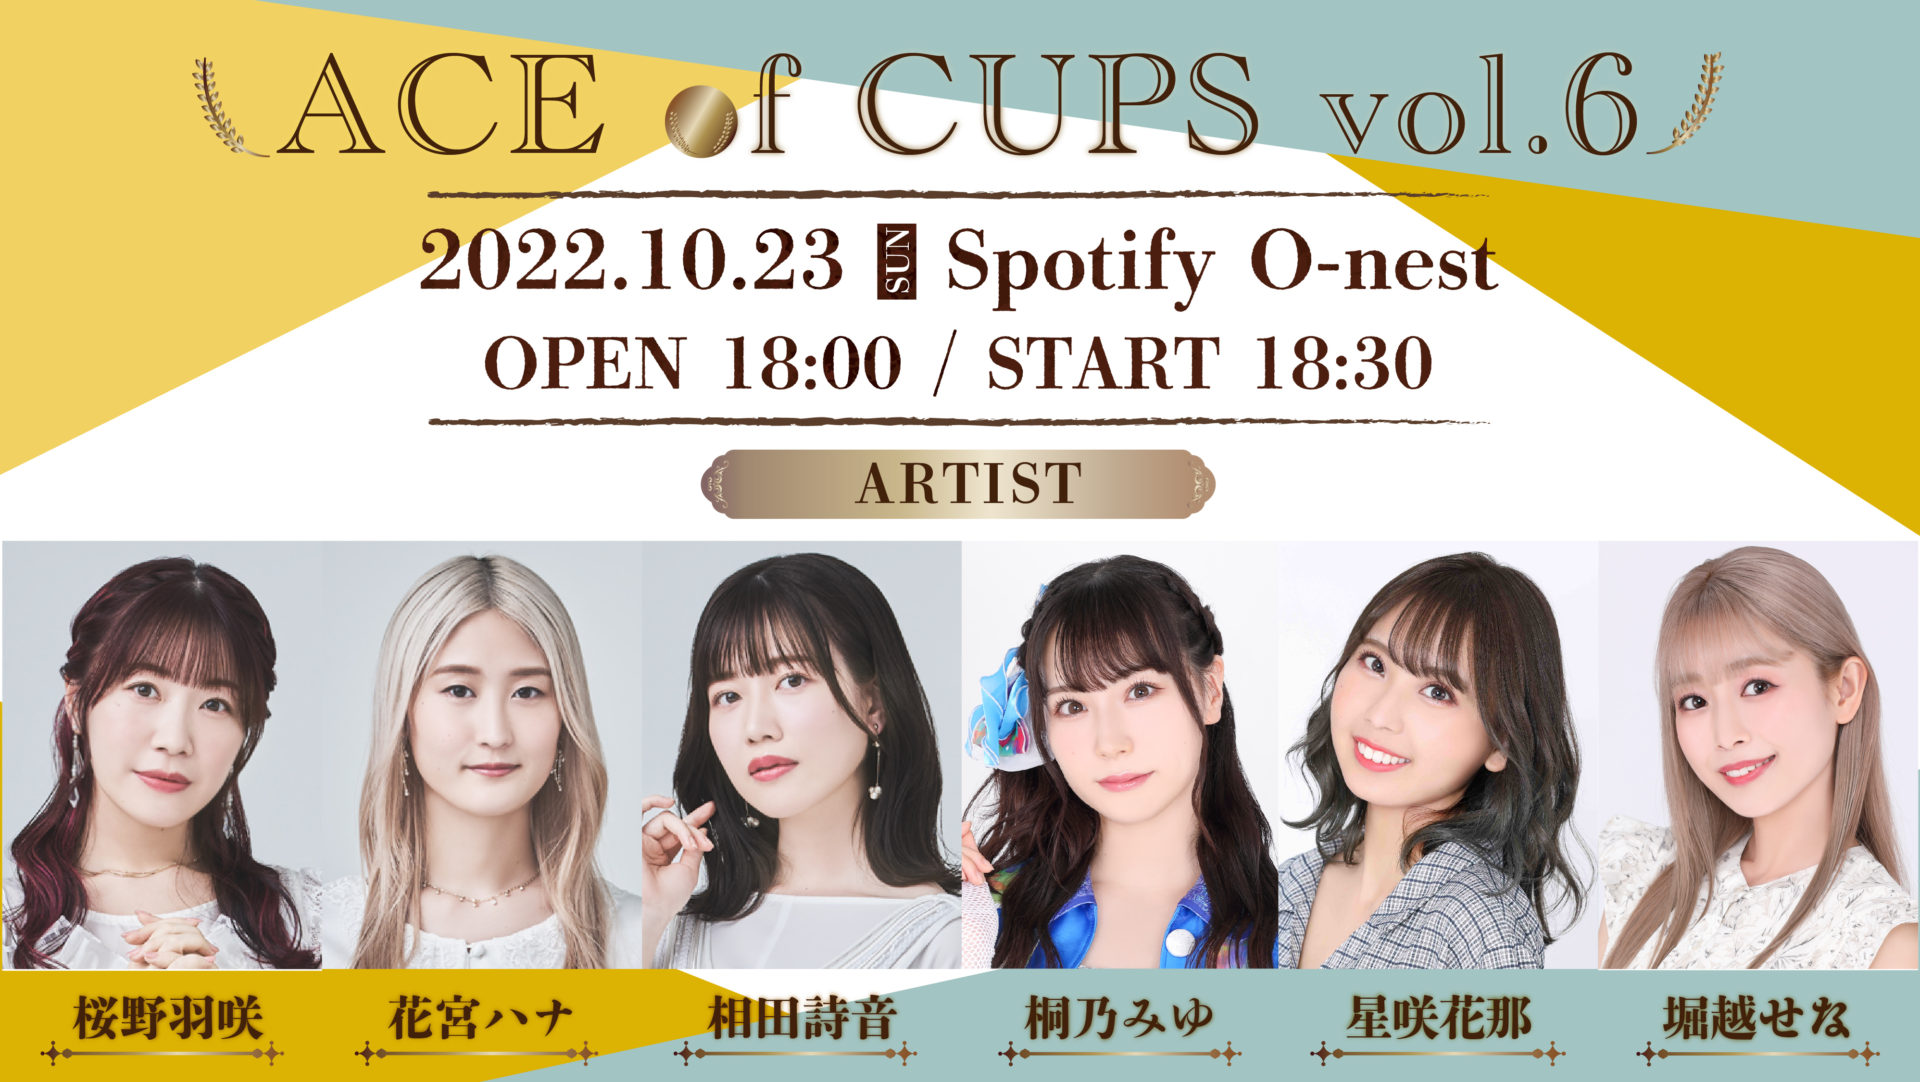 「ACE of CUPS Vol.6」